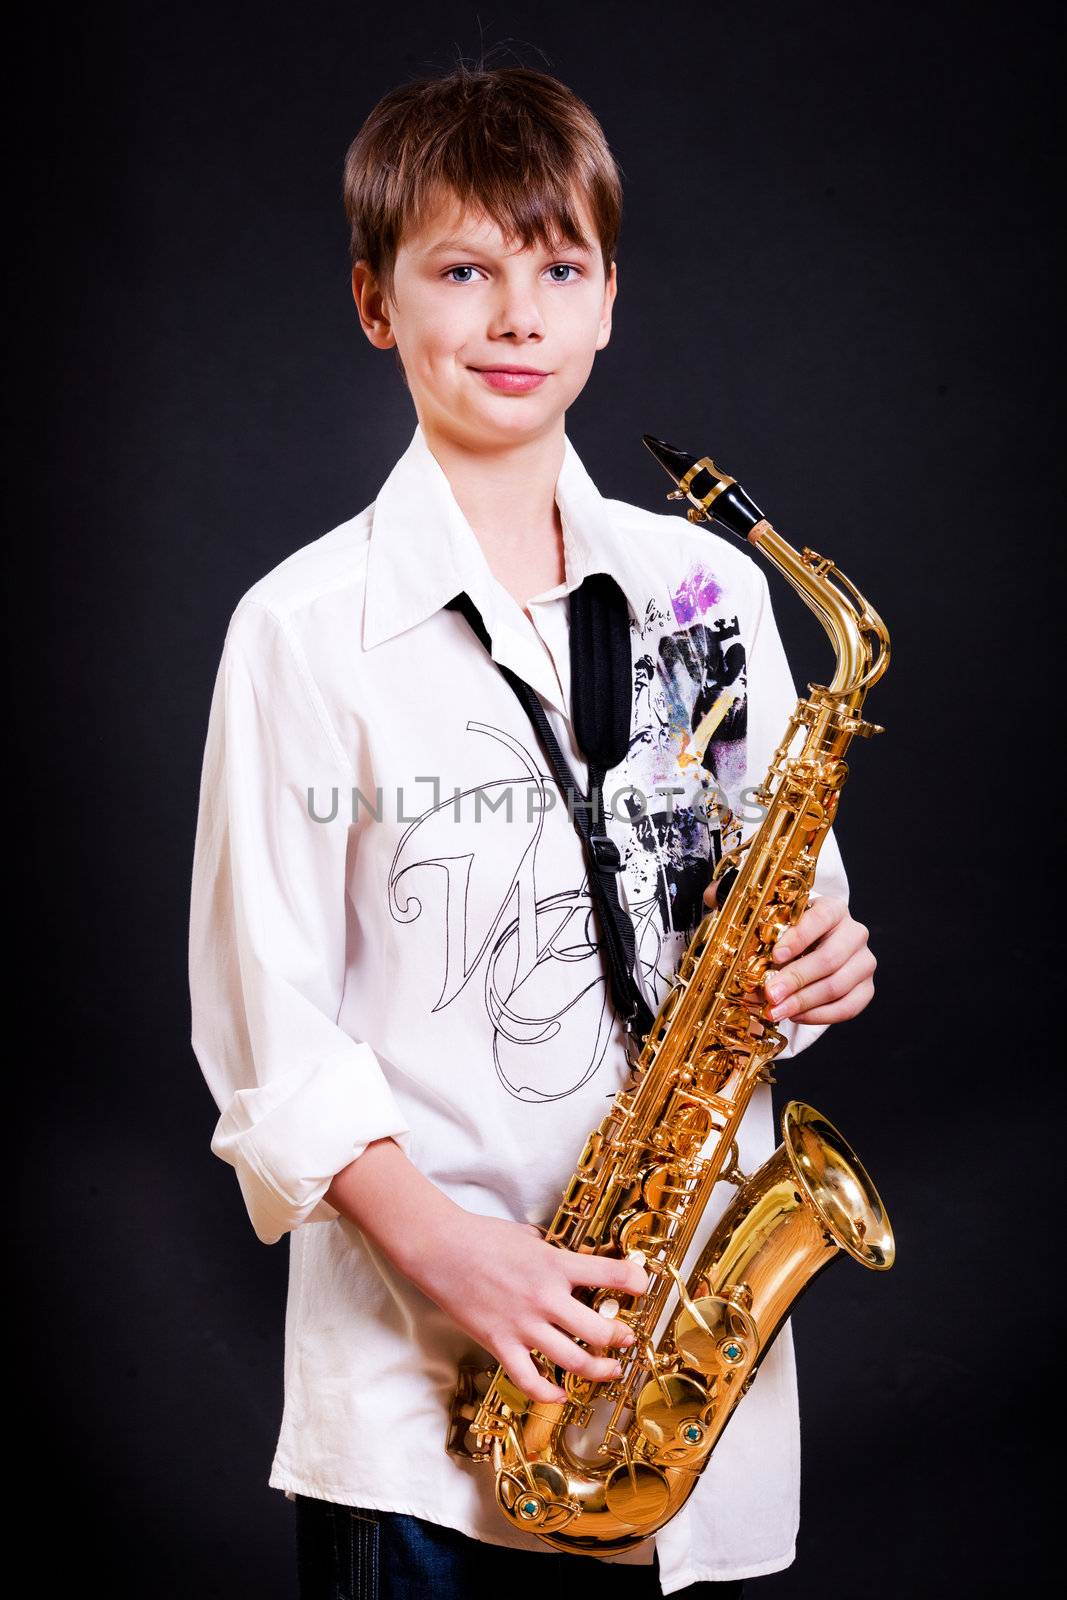 9 year old boy with a saxophone on black